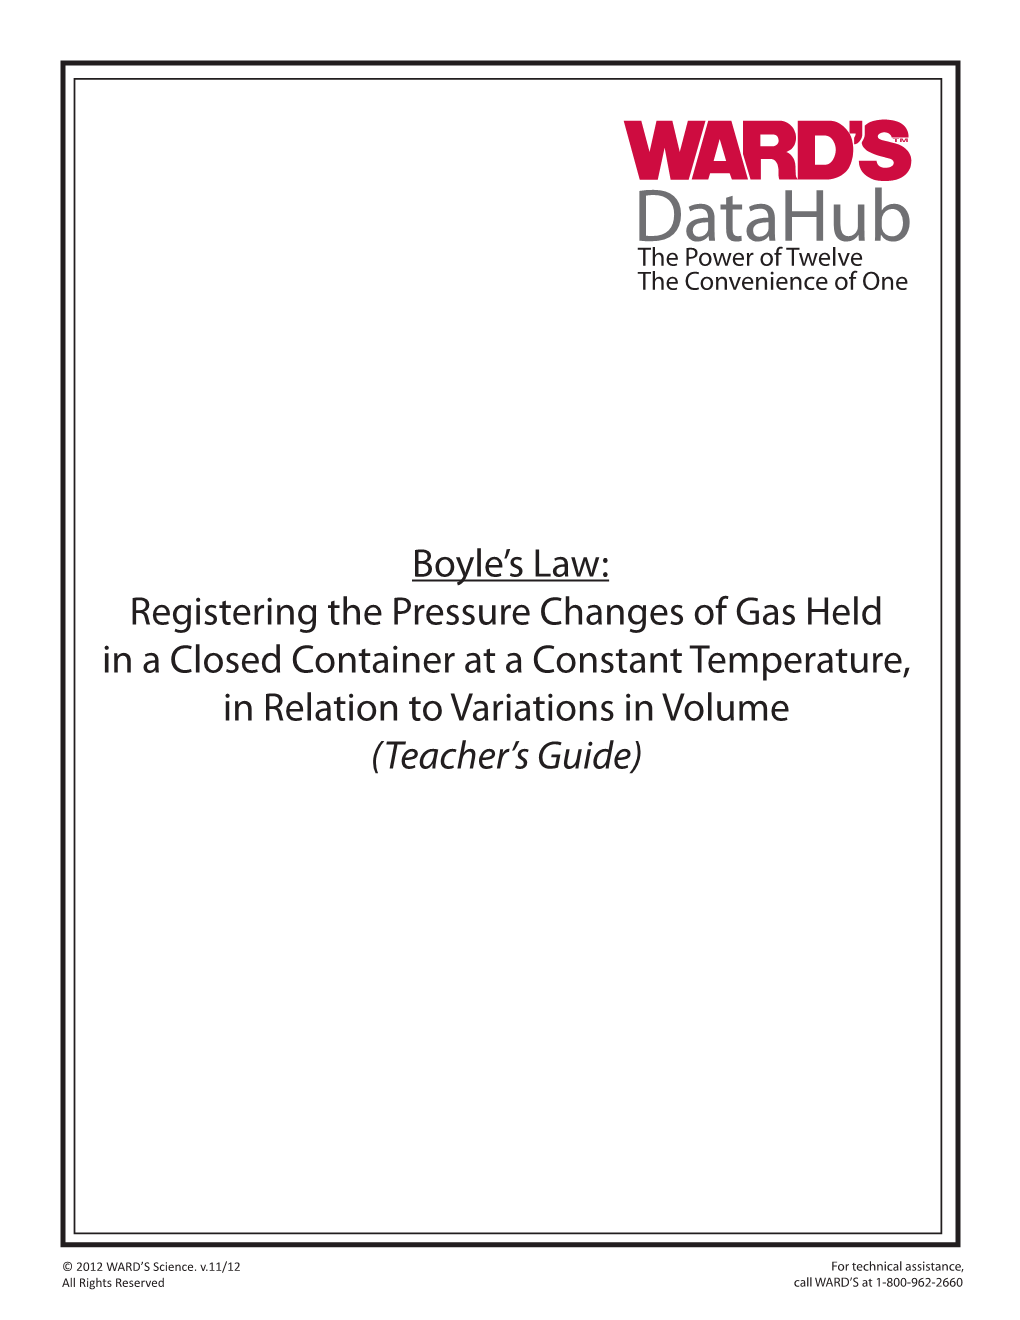 Boyle's Law: Registering the Pressure Changes of Gas Held in a Closed